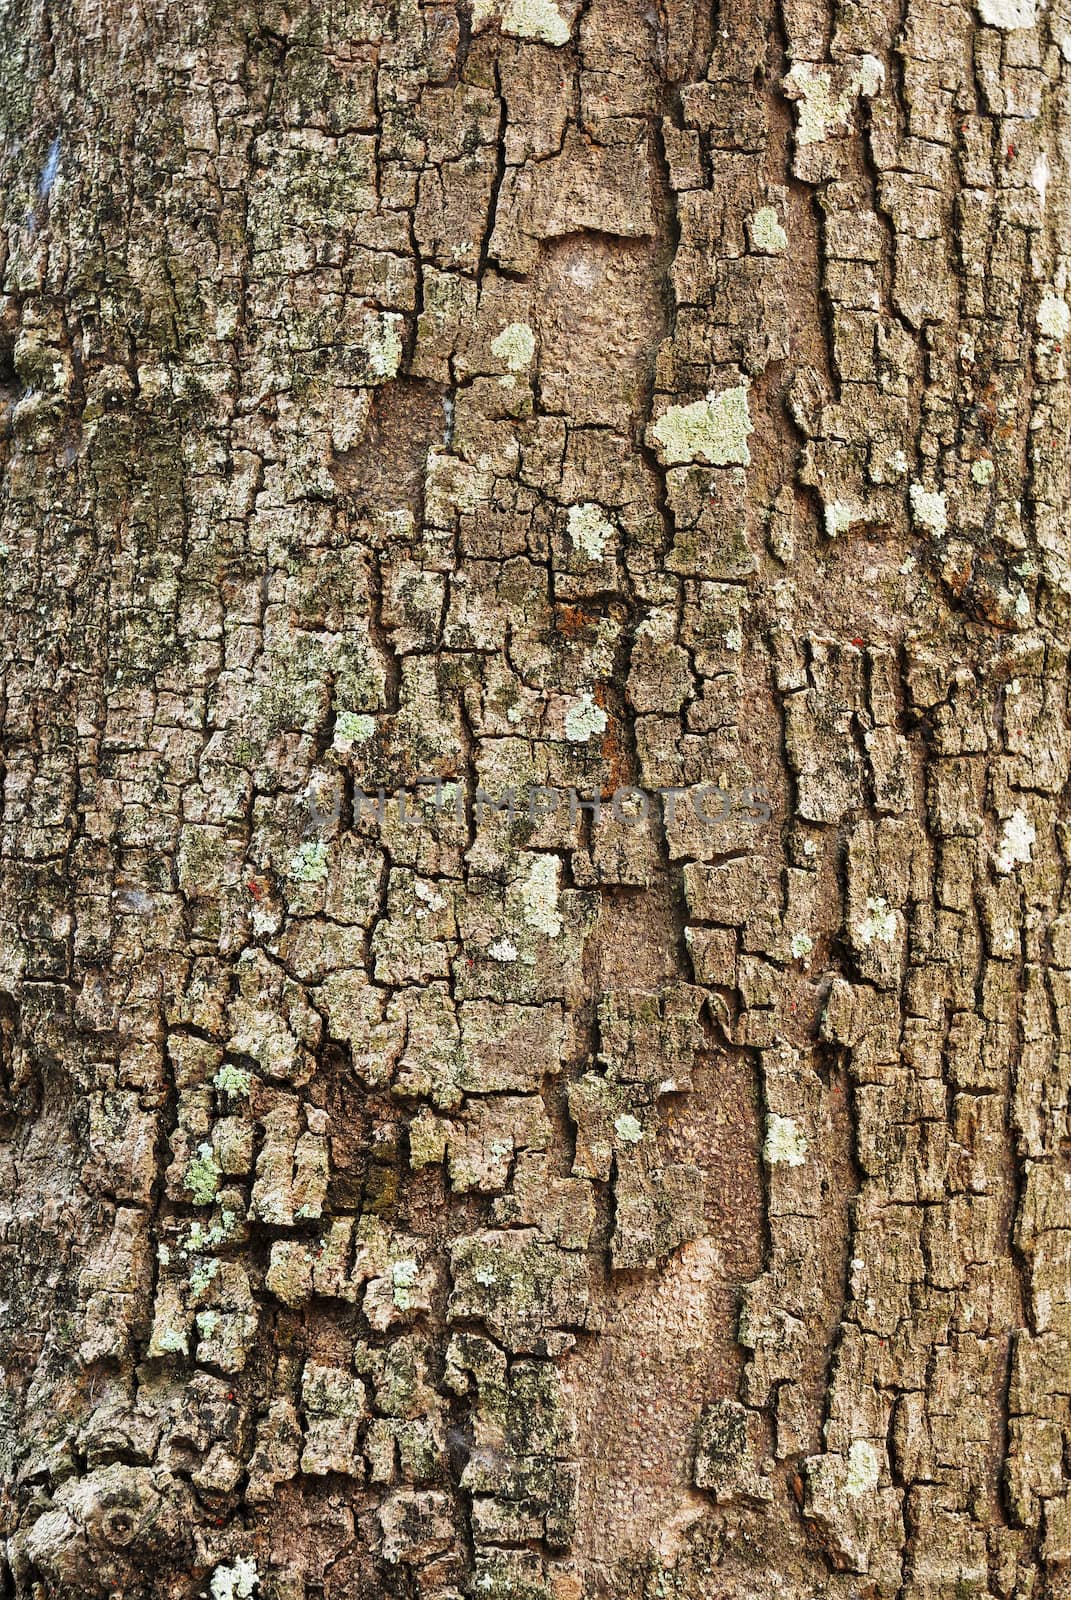 tree bark closeup usable as texture or background